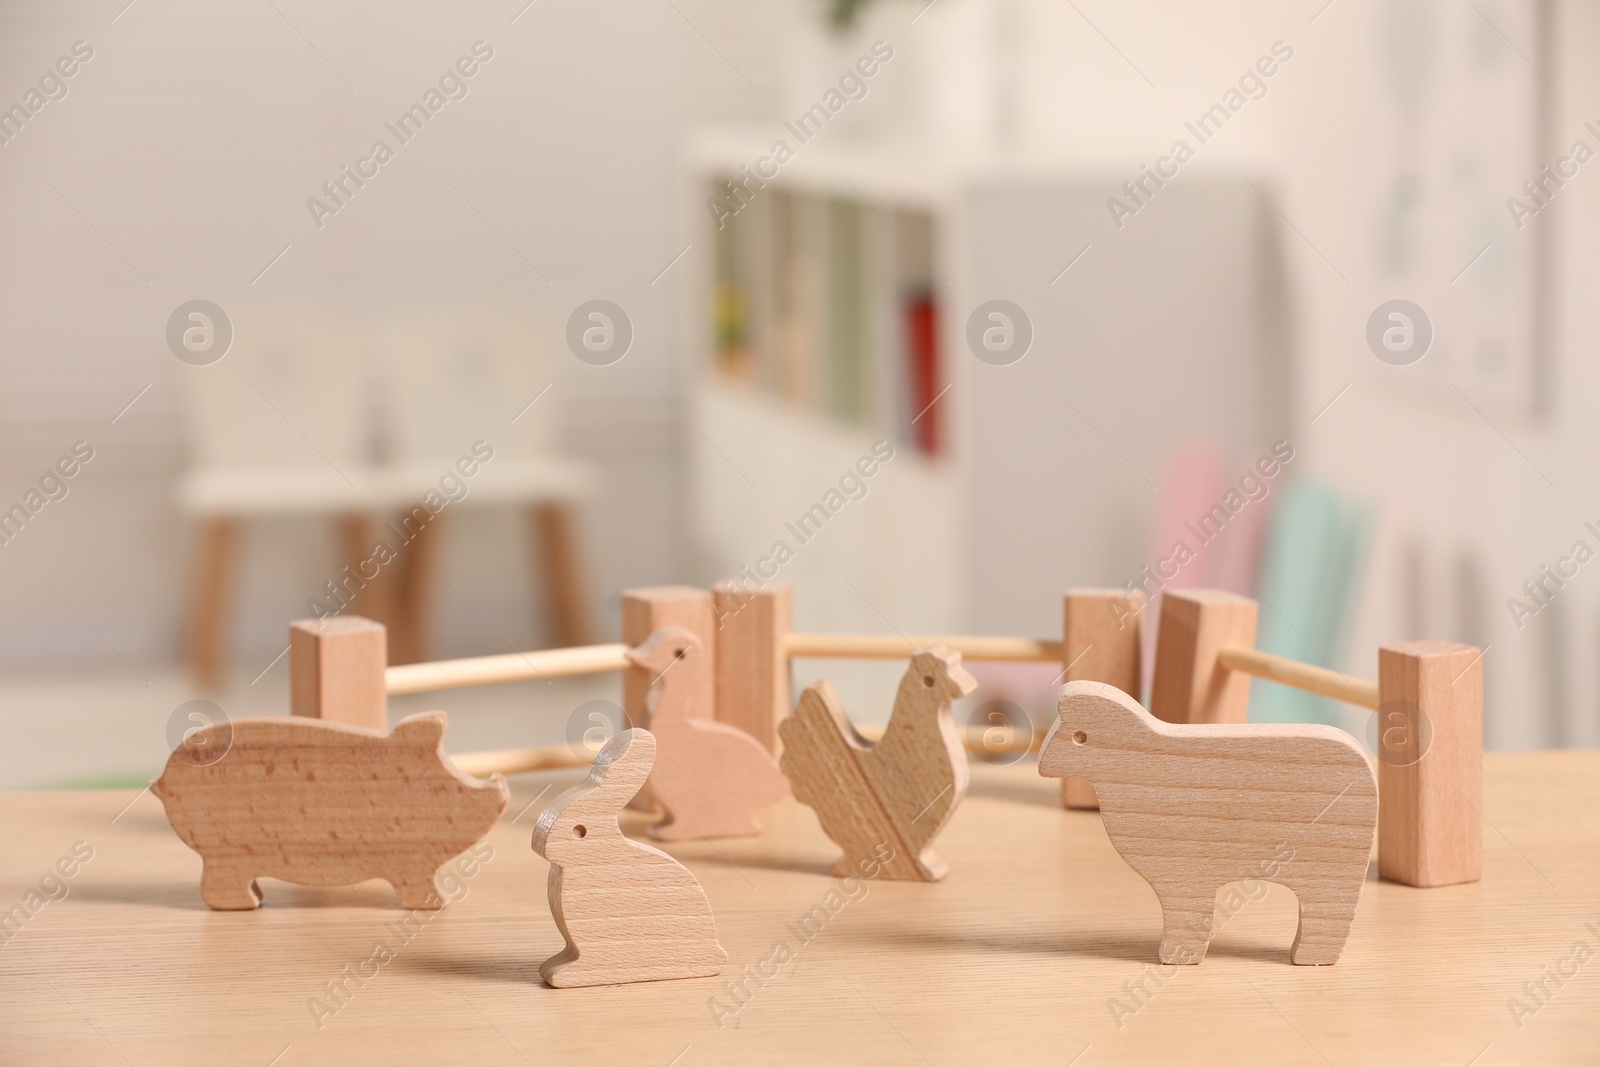 Photo of Wooden animals and fence on table indoors. Children's toys